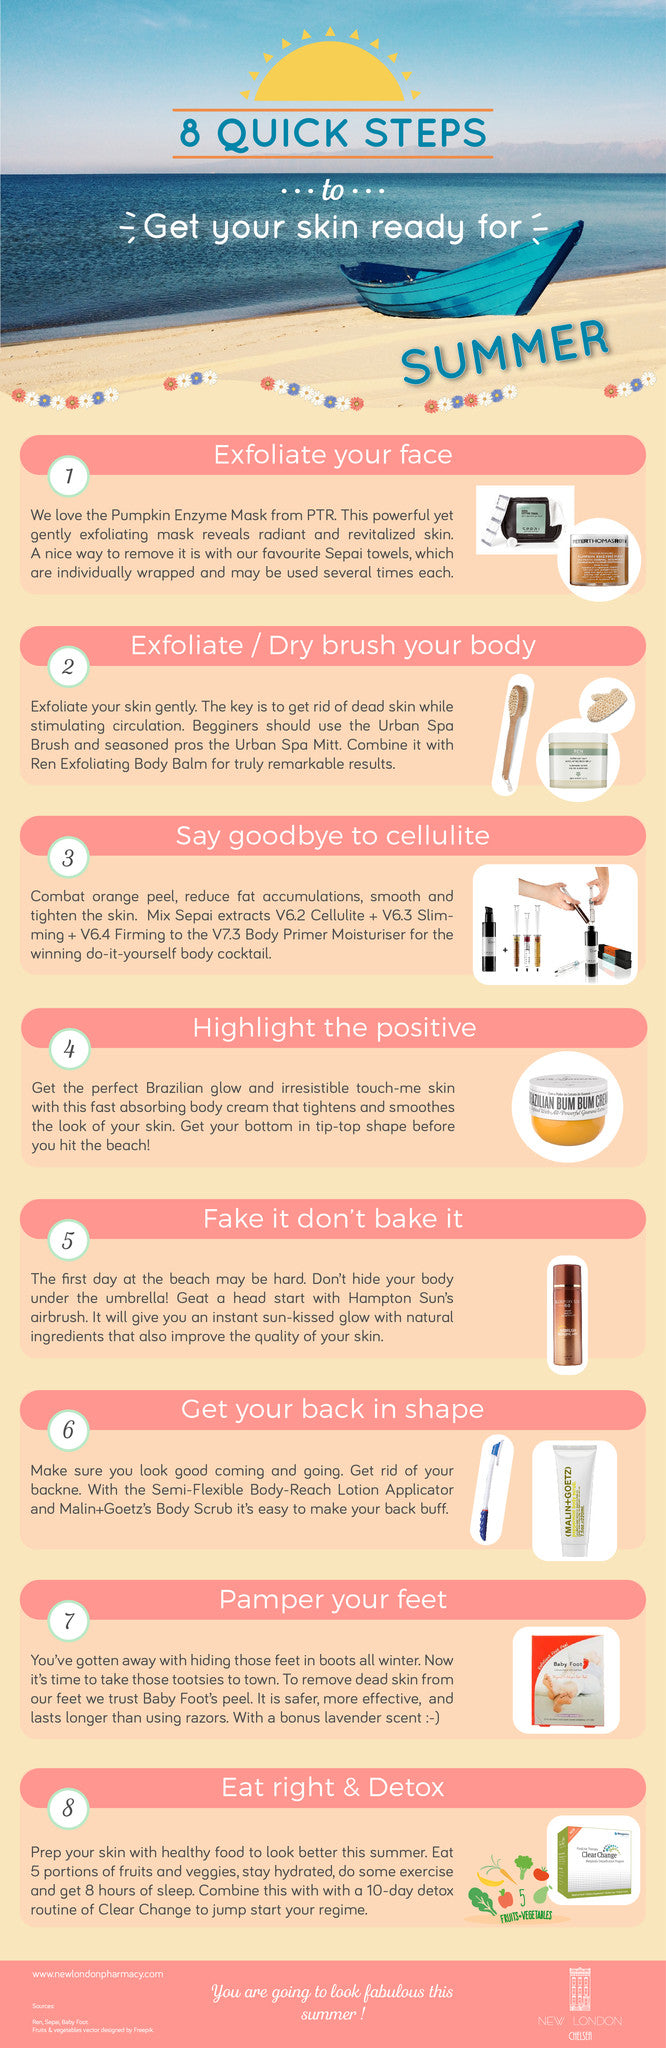 8 Quick Steps to Get Your Skin Ready for Summer